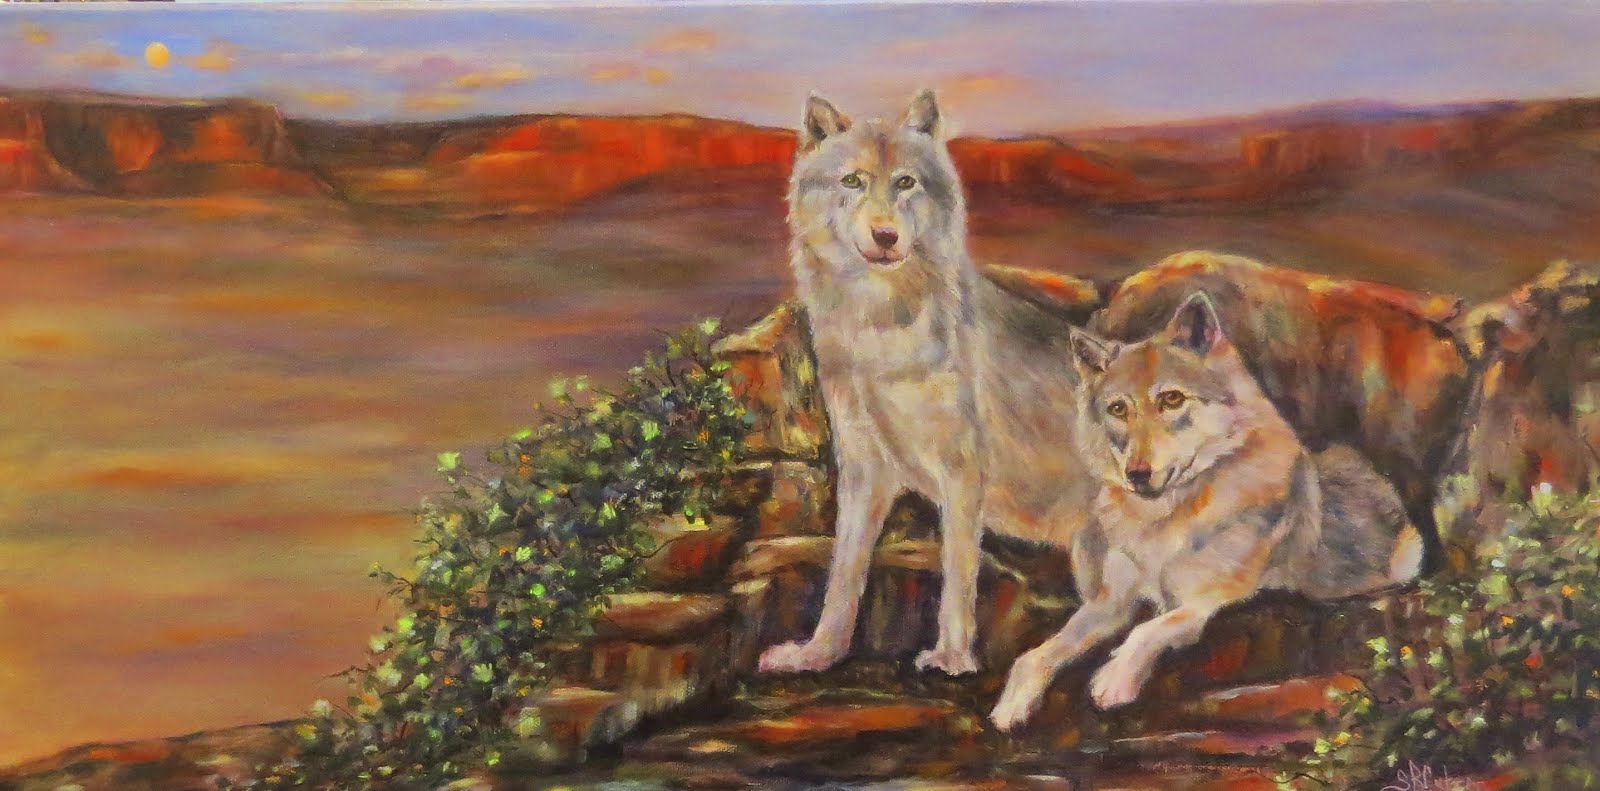 Two Wolves and a Sunset